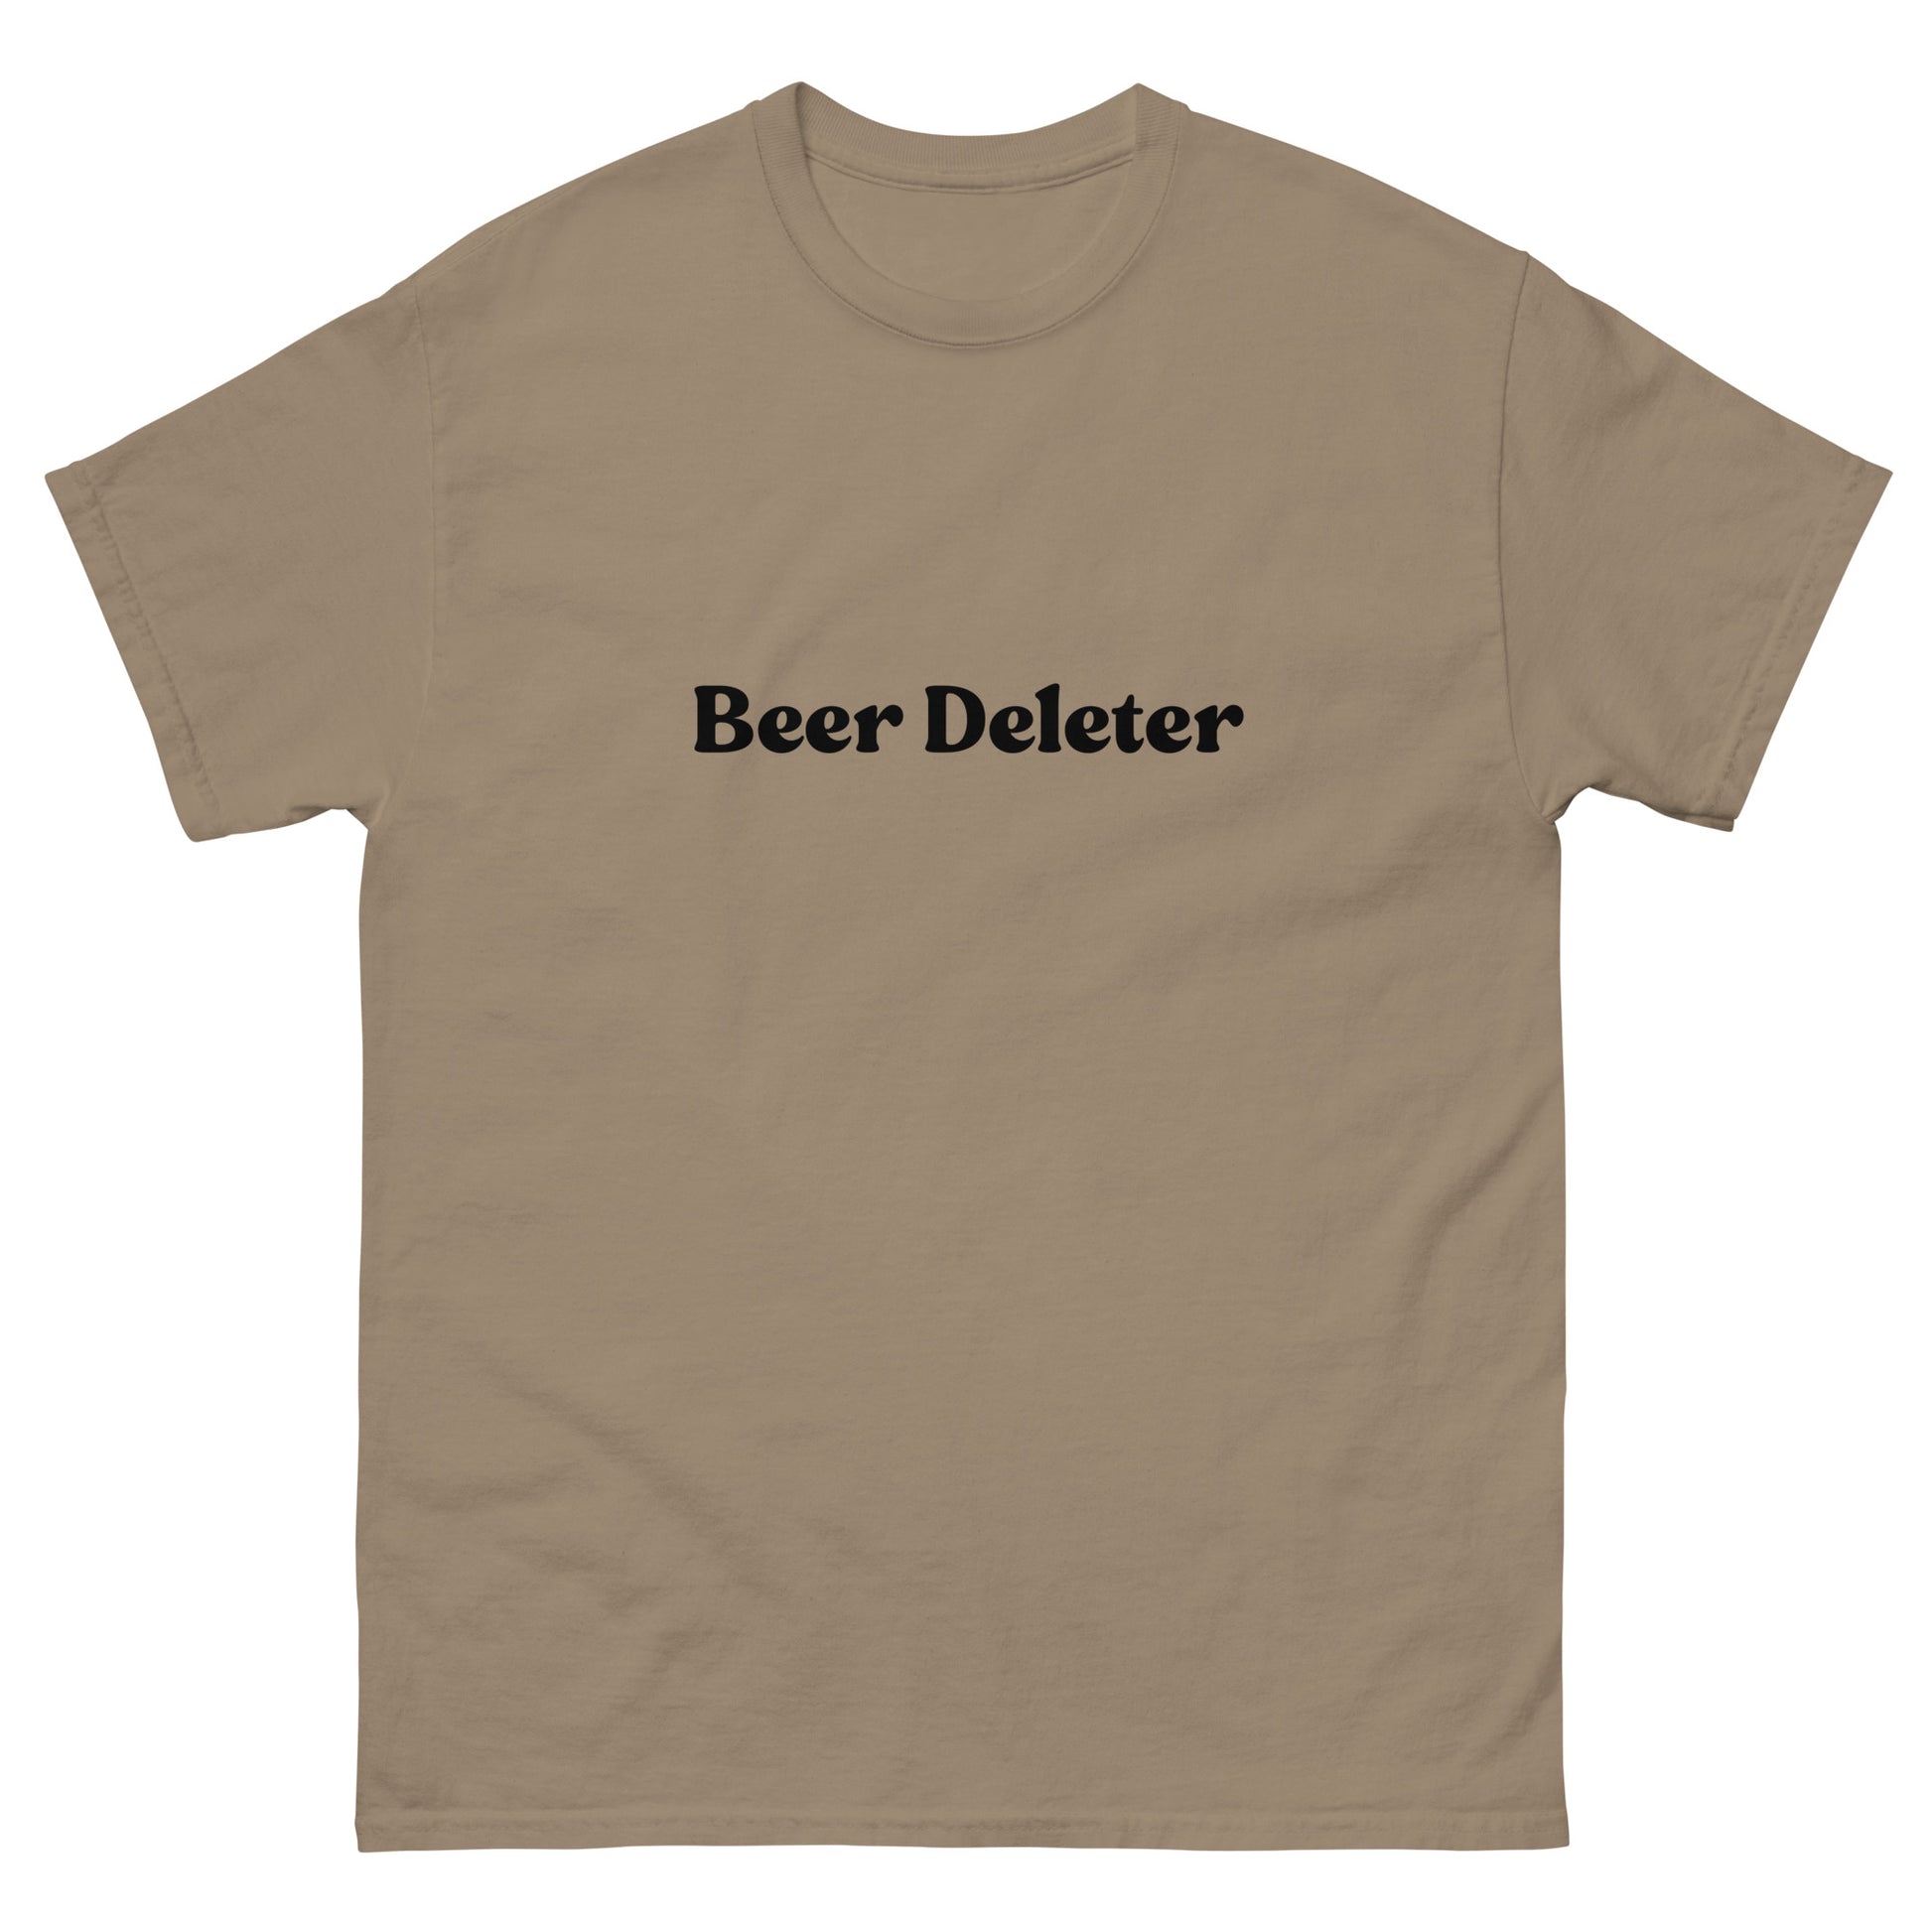 Beer Deleter T-Shirt – Rodeo Clown Trading Company